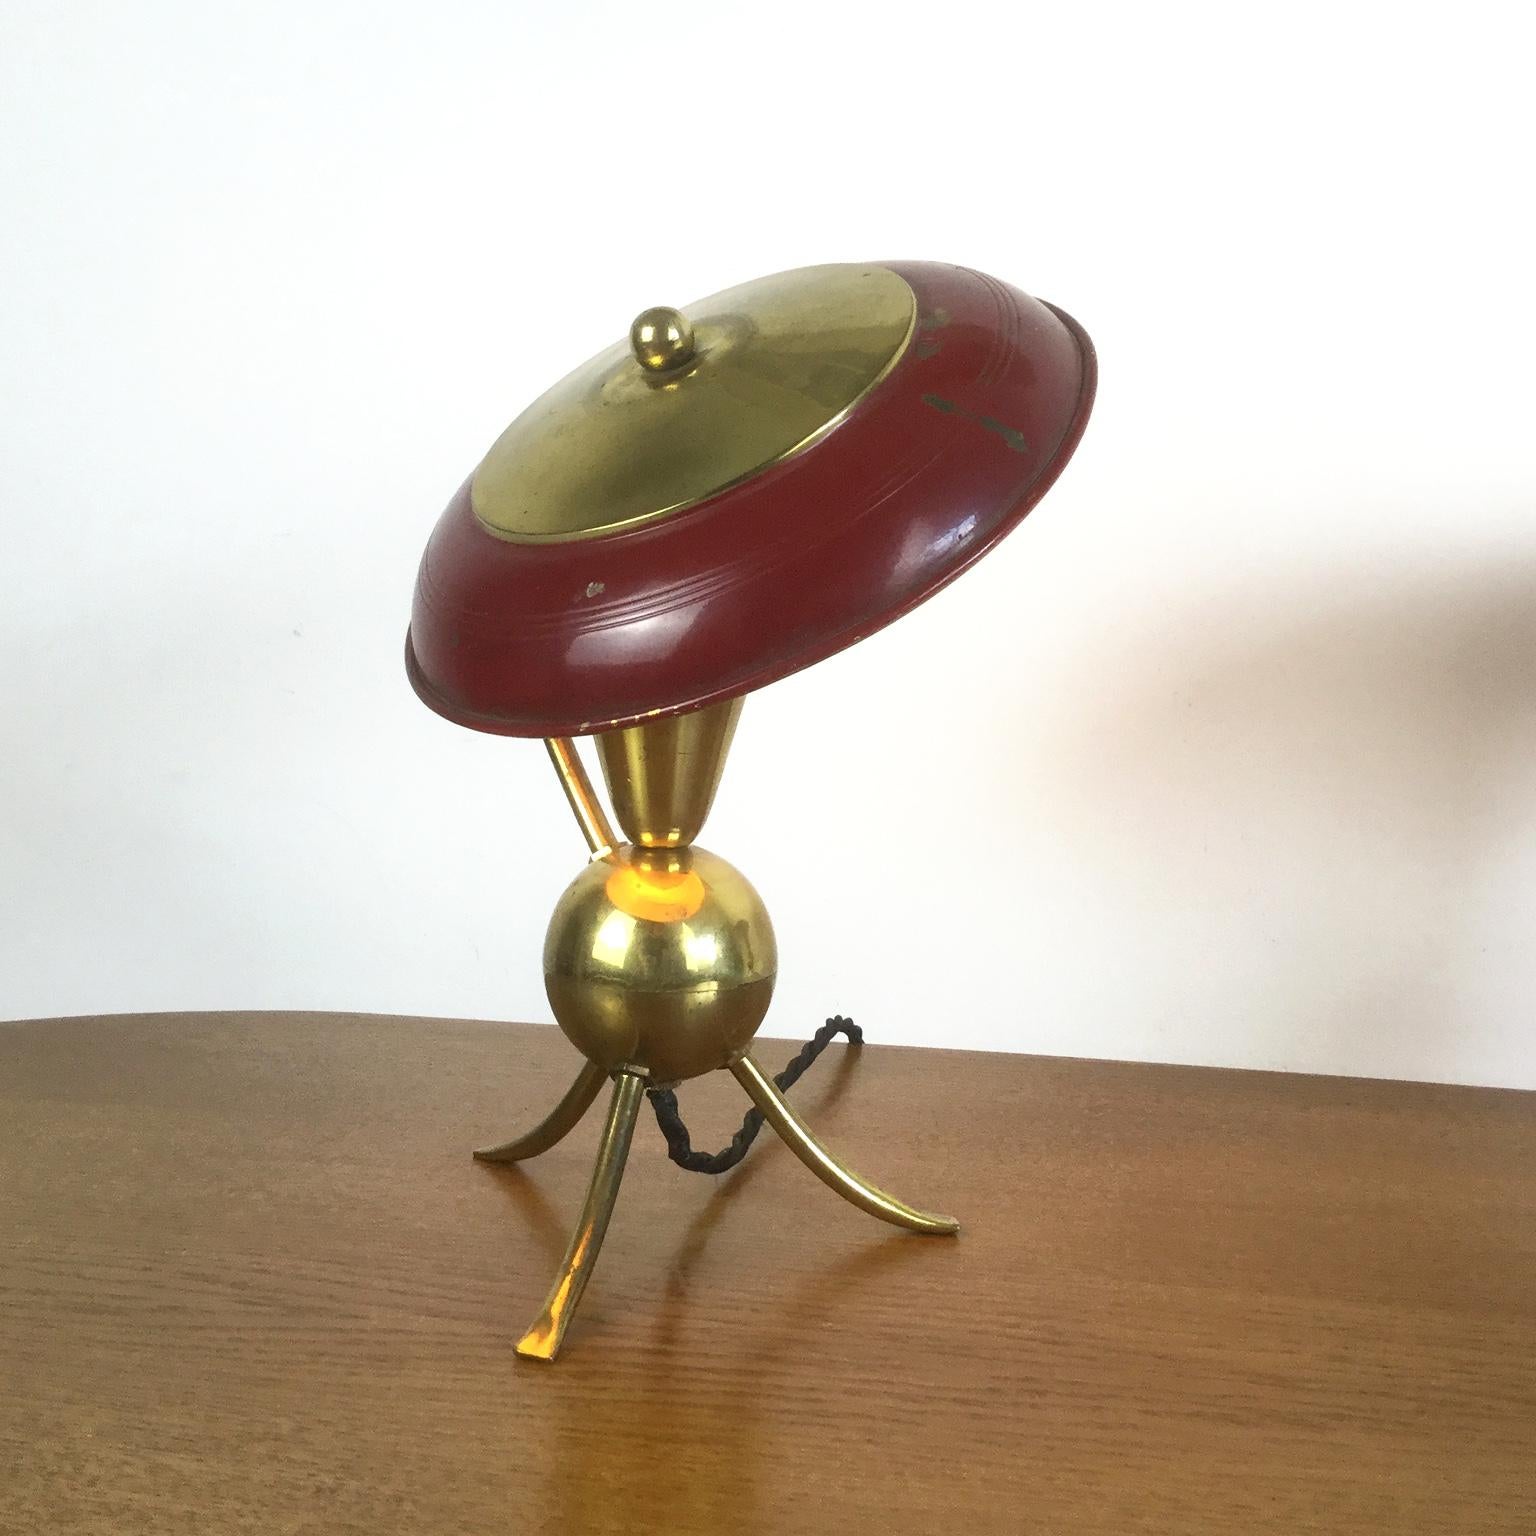 European Pair of Red Enamel and Brass Tripod Table Lamp, French, 1950s For Sale